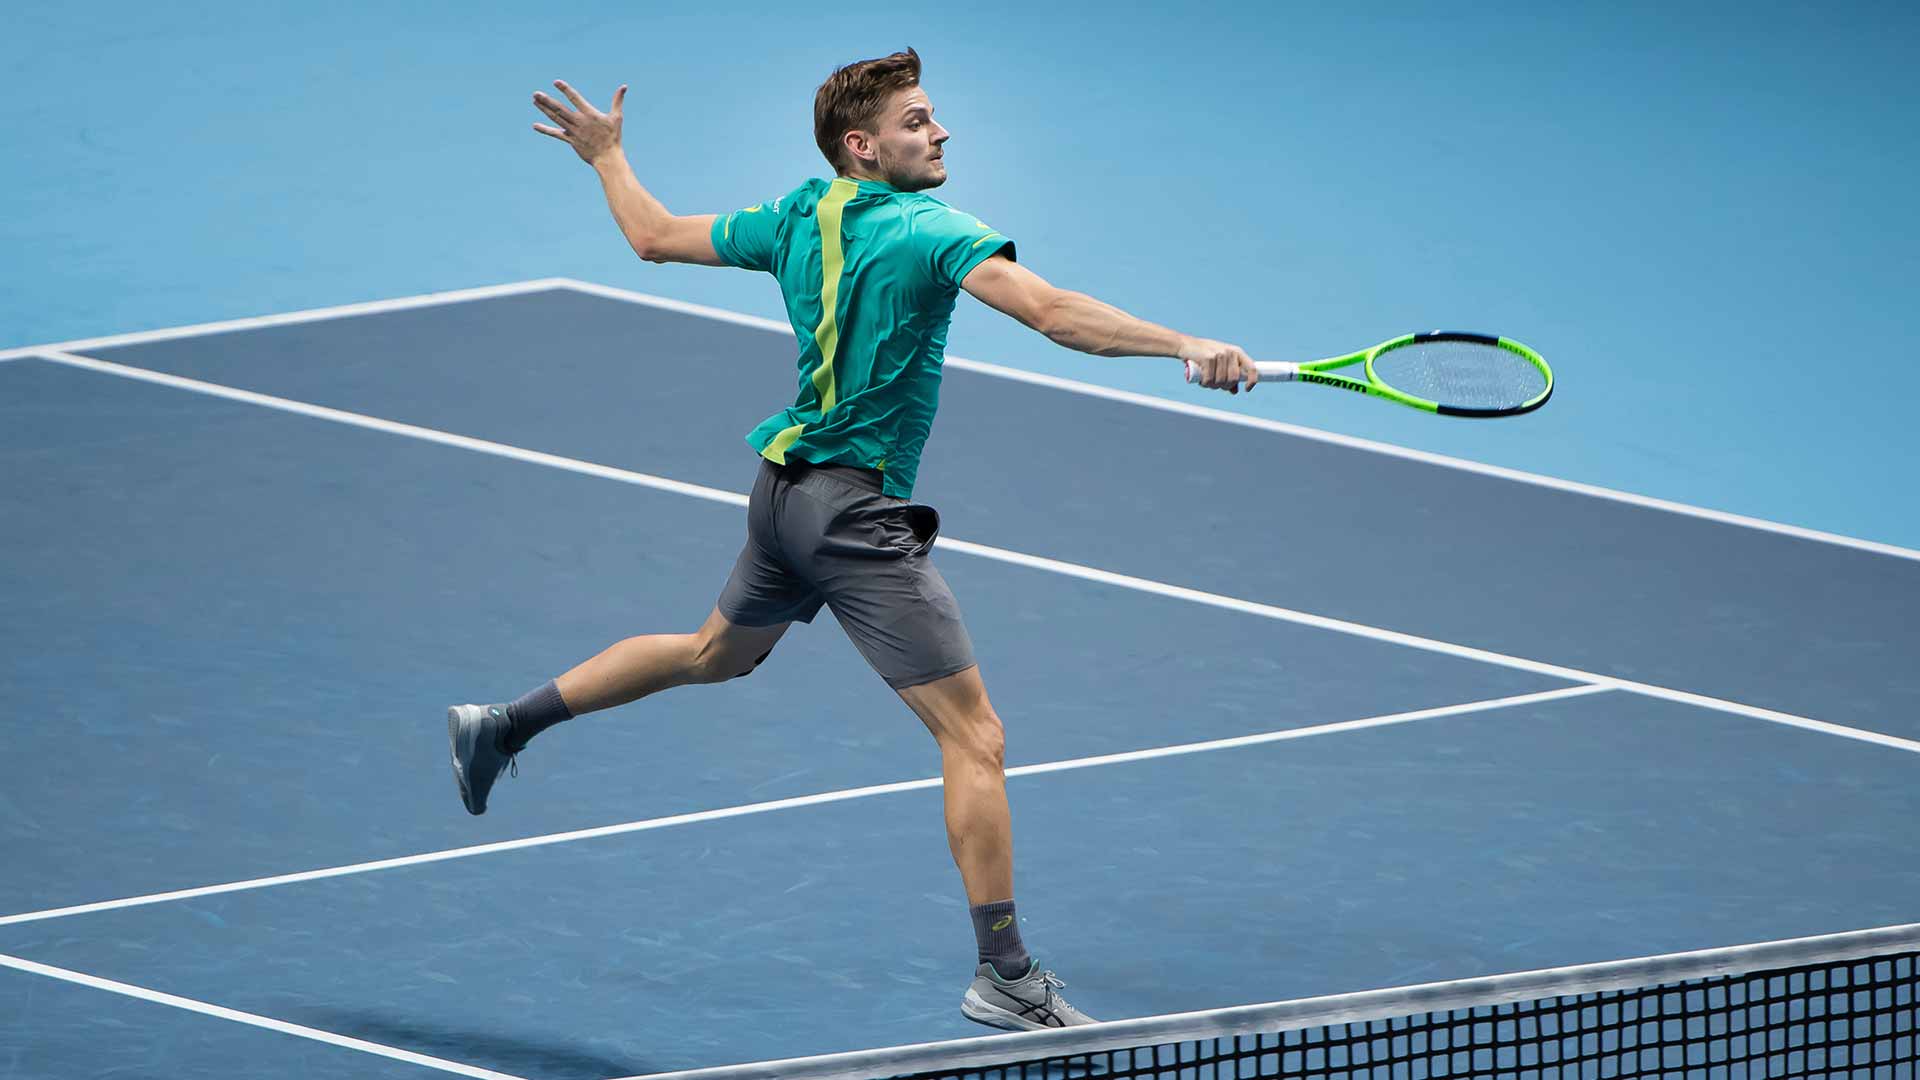 David Goffin To Face Roger Federer In Nitto ATP Finals SFs | Nitto ATP Finals1920 x 1080